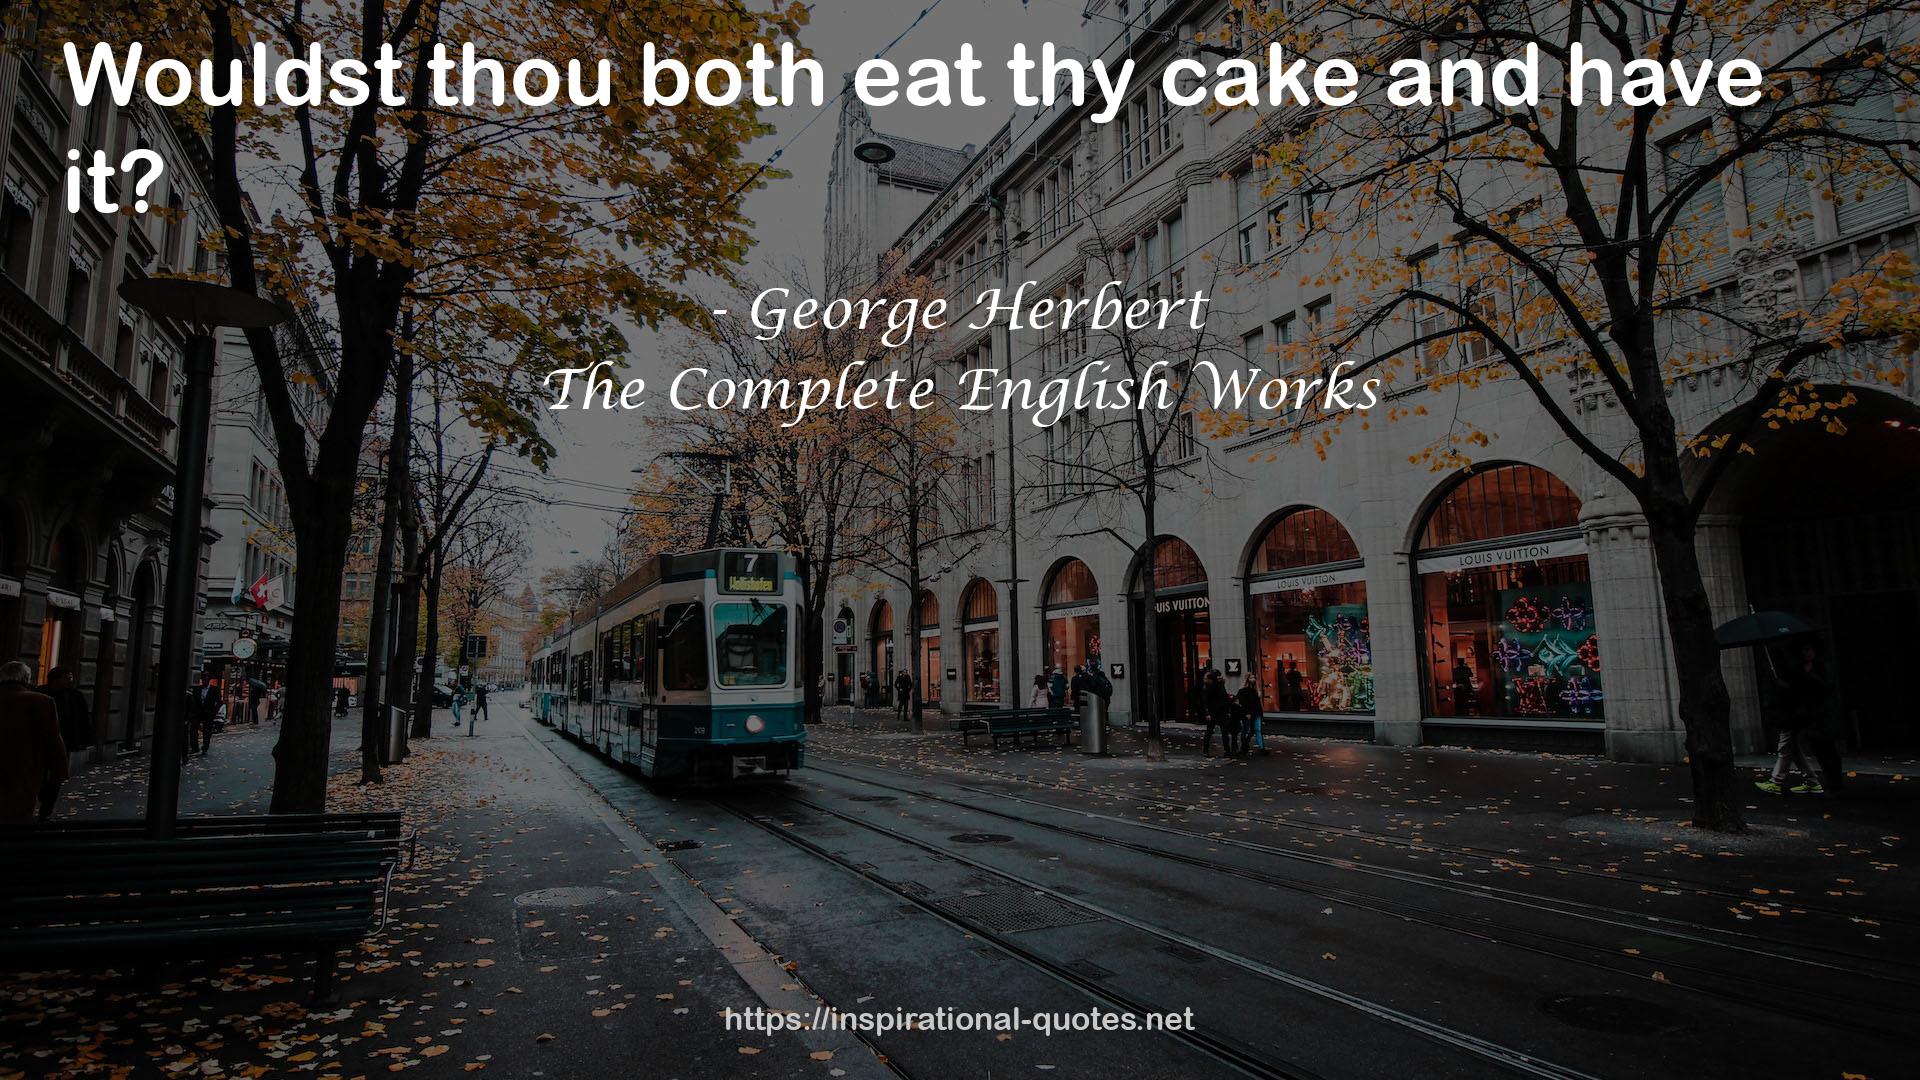 The Complete English Works QUOTES